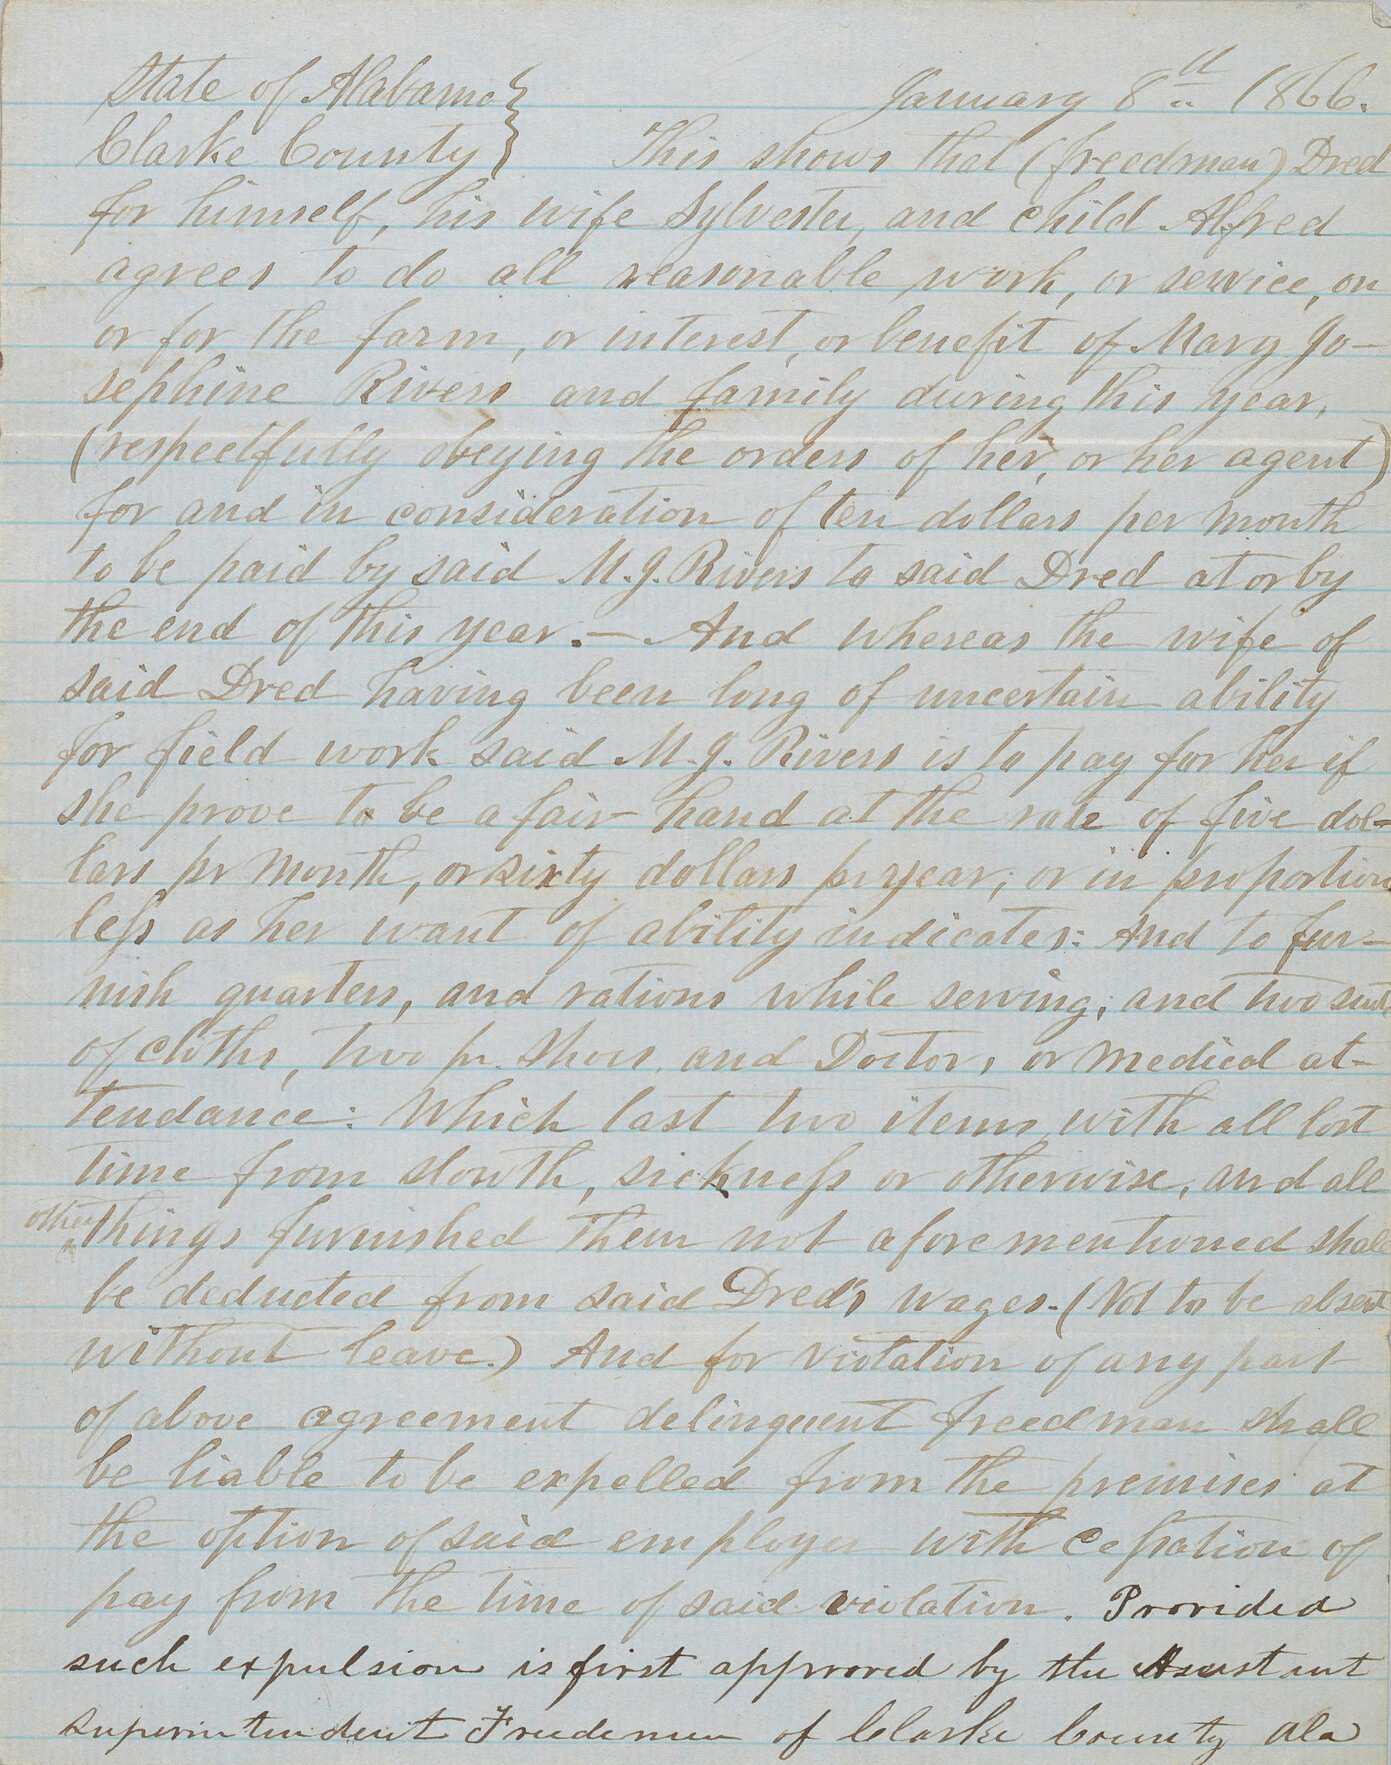 A handwritten contract between Freedman Dred and Mary Josephine Rivers. The document stipulates that Dred and his child Alfred are to work for ten dollars per month for Rivers and her family in Clarke County, Alabama, with an additional five dollars per month to be paid if Dred's wife Sylvester is also capable of field work. Lodging, rations, and mending of clothes is included, and pay is to be delivered "at or by the end of this year" with deductions for doctors and medical care as well as "all lost time from slouth, sickness or otherwise, and all things furnished them not aforementioned." Dred is not to be absent without leave and faces expulsion from the property if the terms of the contract are violated. The final line of the contract appears in darker ink and states that expulsion must first be approved by the Assistant Superintendent of Freedment in Clarke County. The document is written on blue lined paper in dark ink, which is faded. Sheet is folded into quarters; body of document is interior when folded. The back or outside of the contract has written on it the signatures of Mary Josephine Rivers and of E. M. Portis, the Assistant Superintendent of Freedmen for Clarke County, Alabama. Approval is dated April 3, 1866.